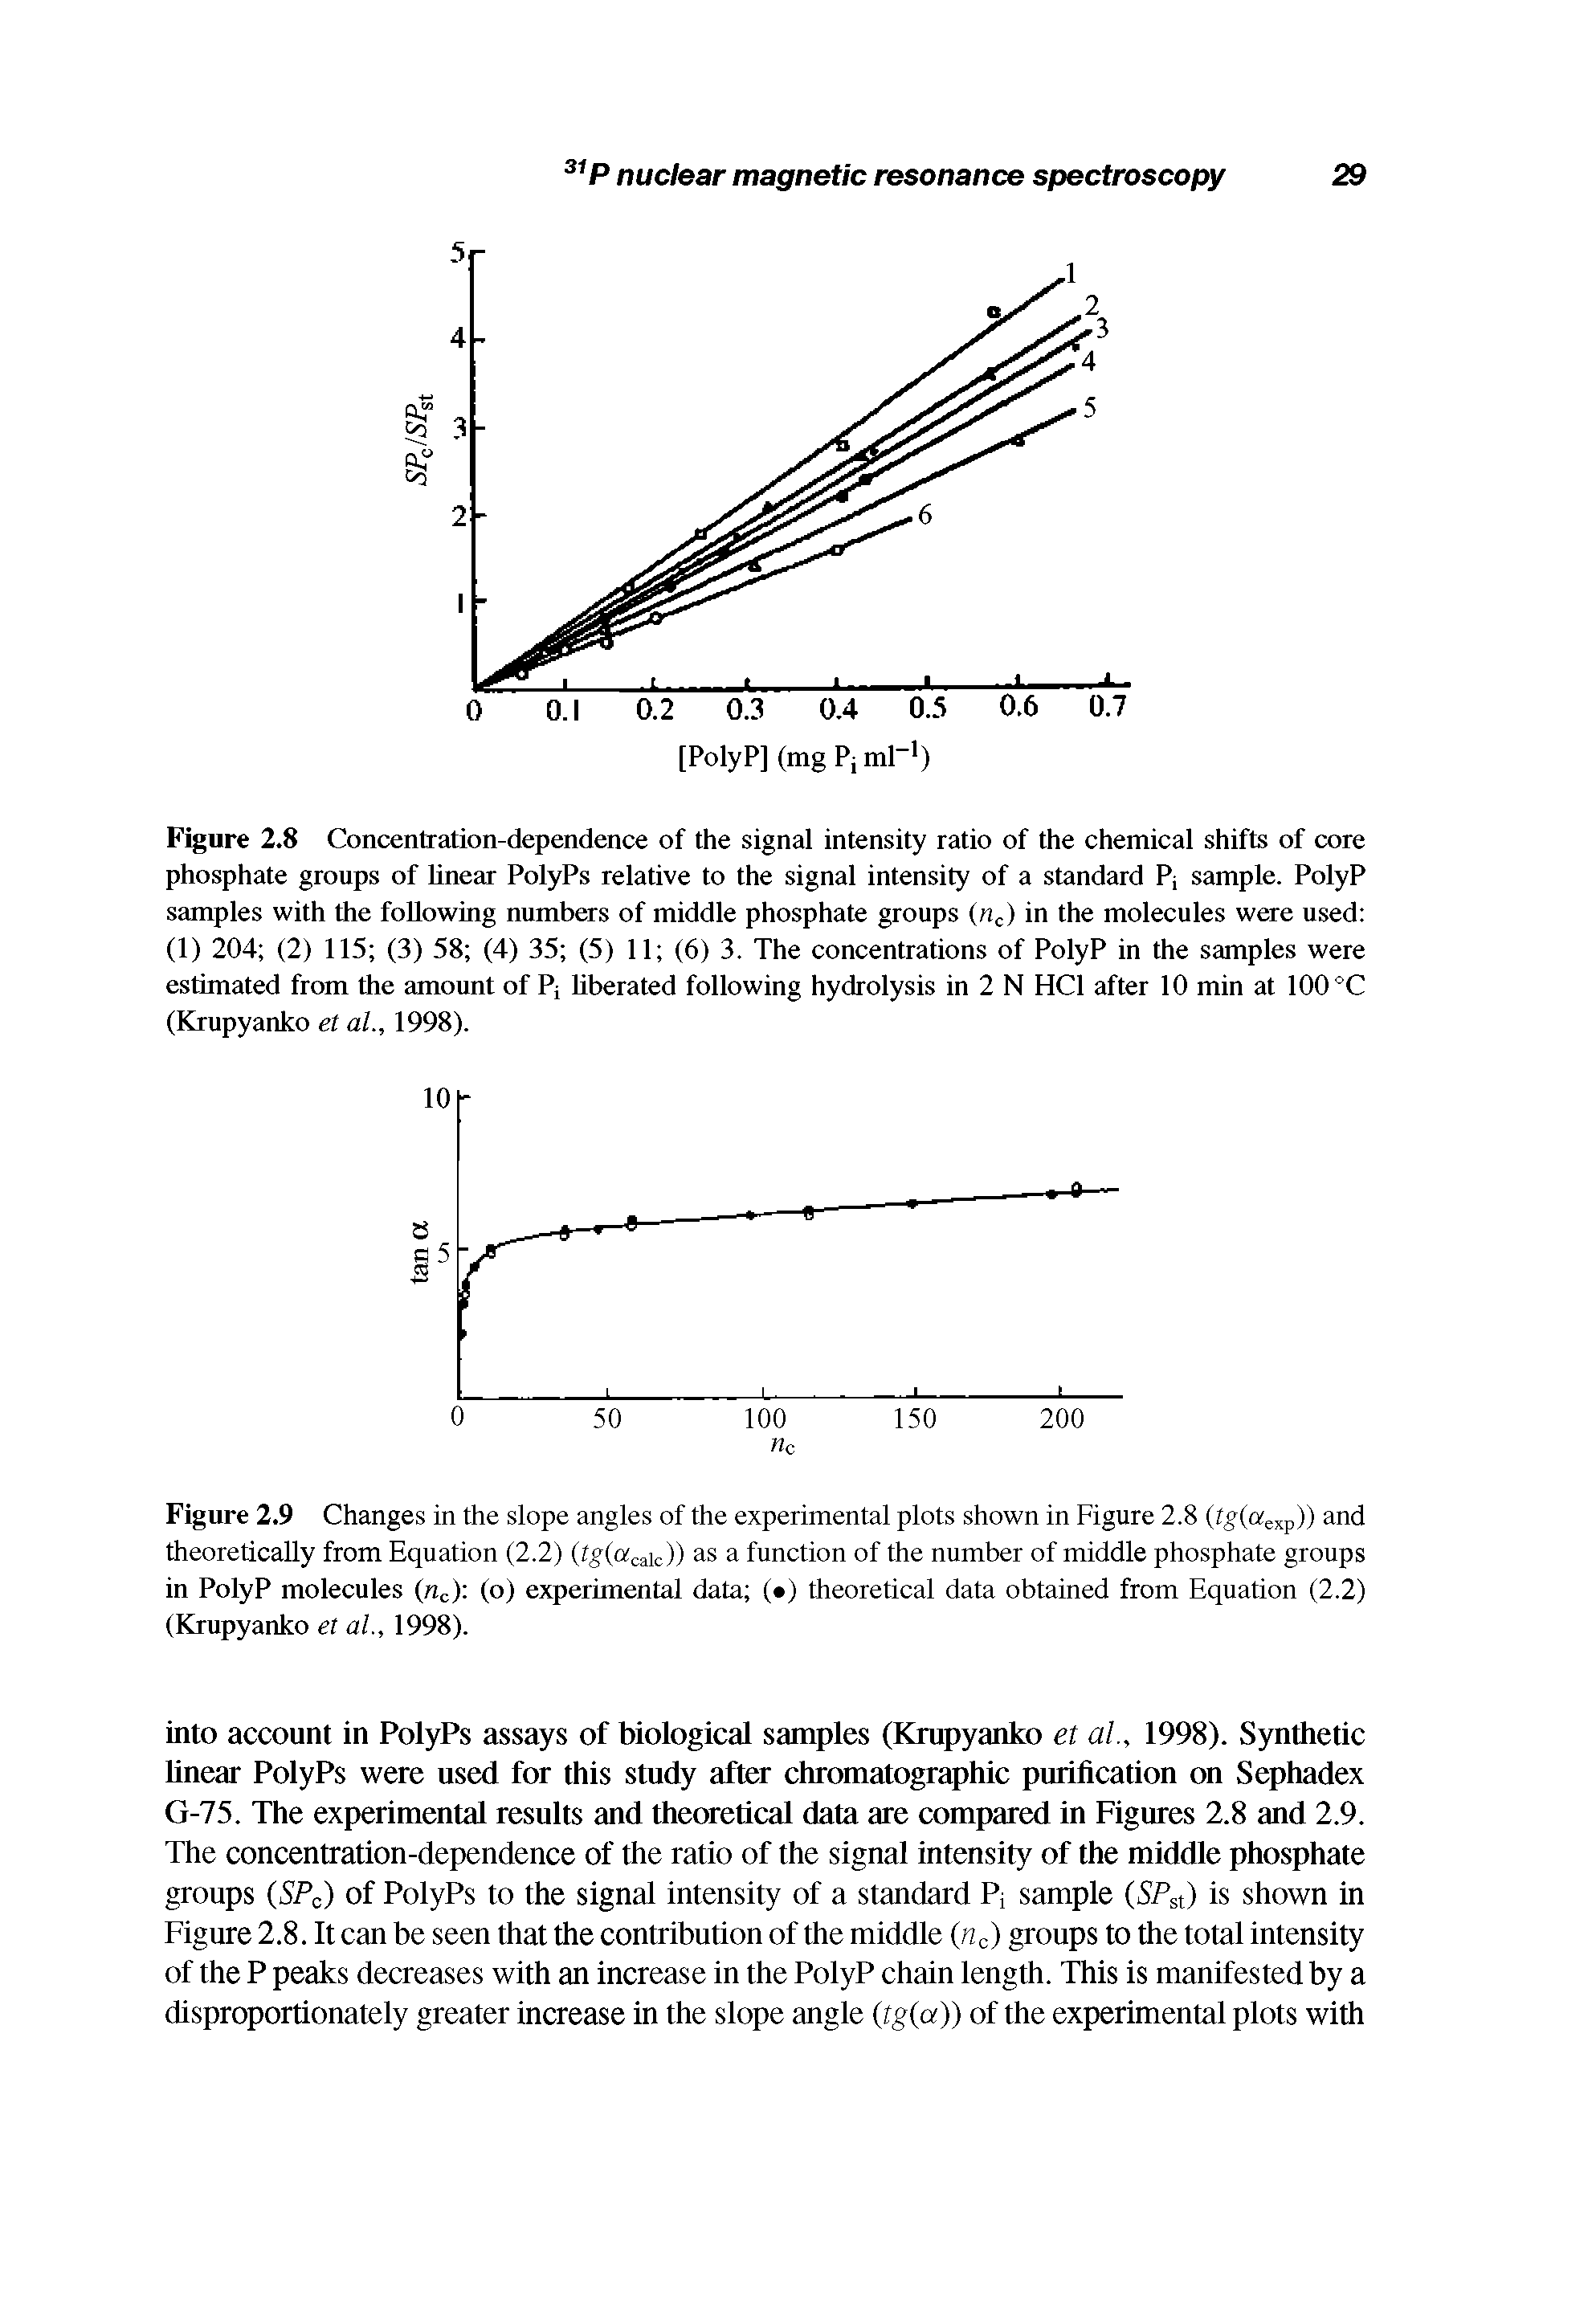 Figure 2.9 Changes in the slope angles of the experimental plots shown in Figure 2.8 (ig(aexp)) and theoretically from Equation (2.2) (tg acaic)) as a function of the number of middle phosphate groups in PolyP molecules (nc) (o) experimental data ( ) theoretical data obtained from Equation (2.2) (Krupyanko et al., 1998).